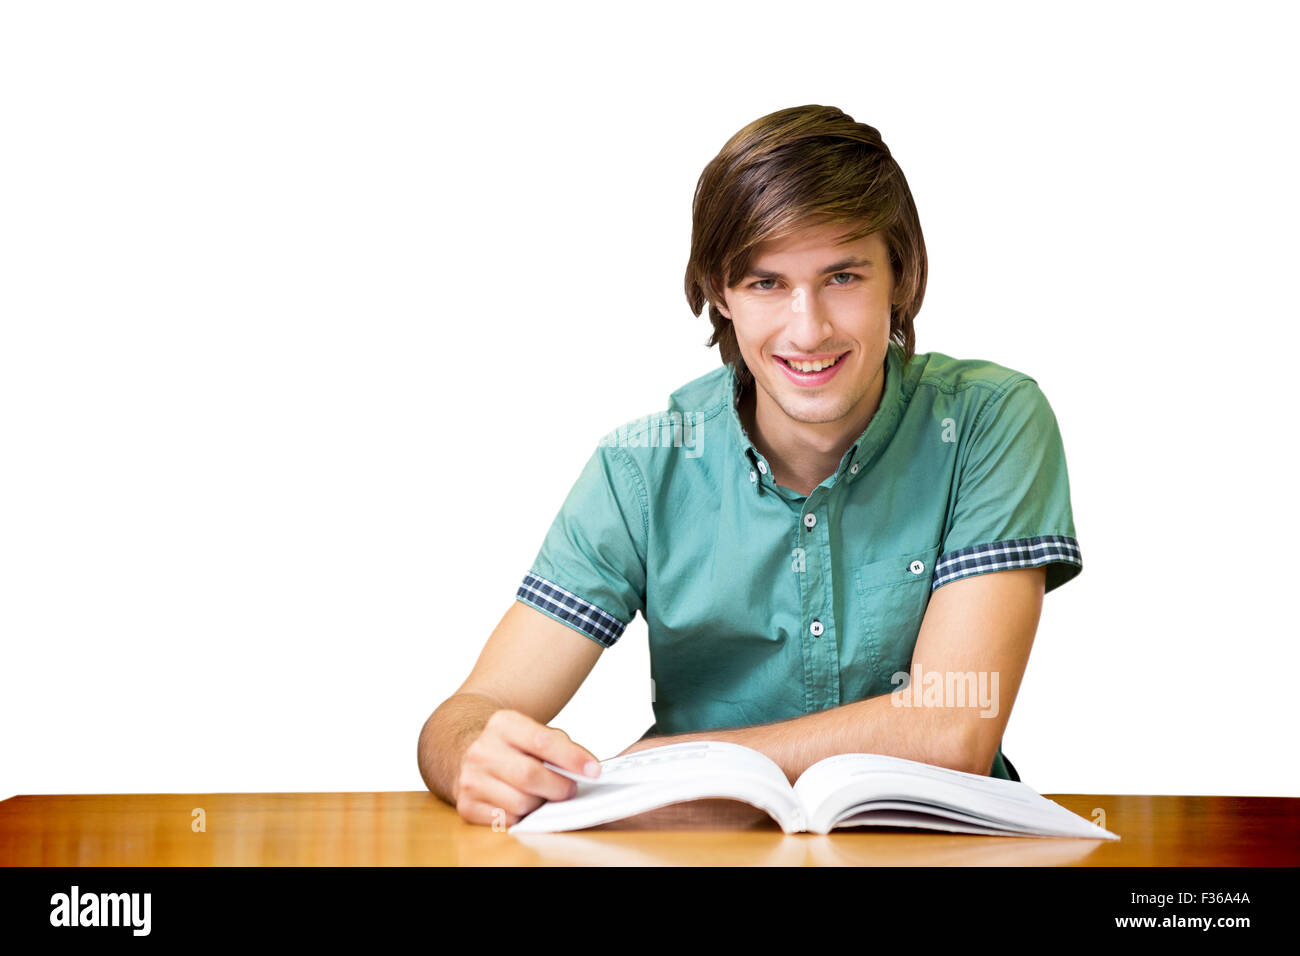 Student sitting in library reading Stock Photo